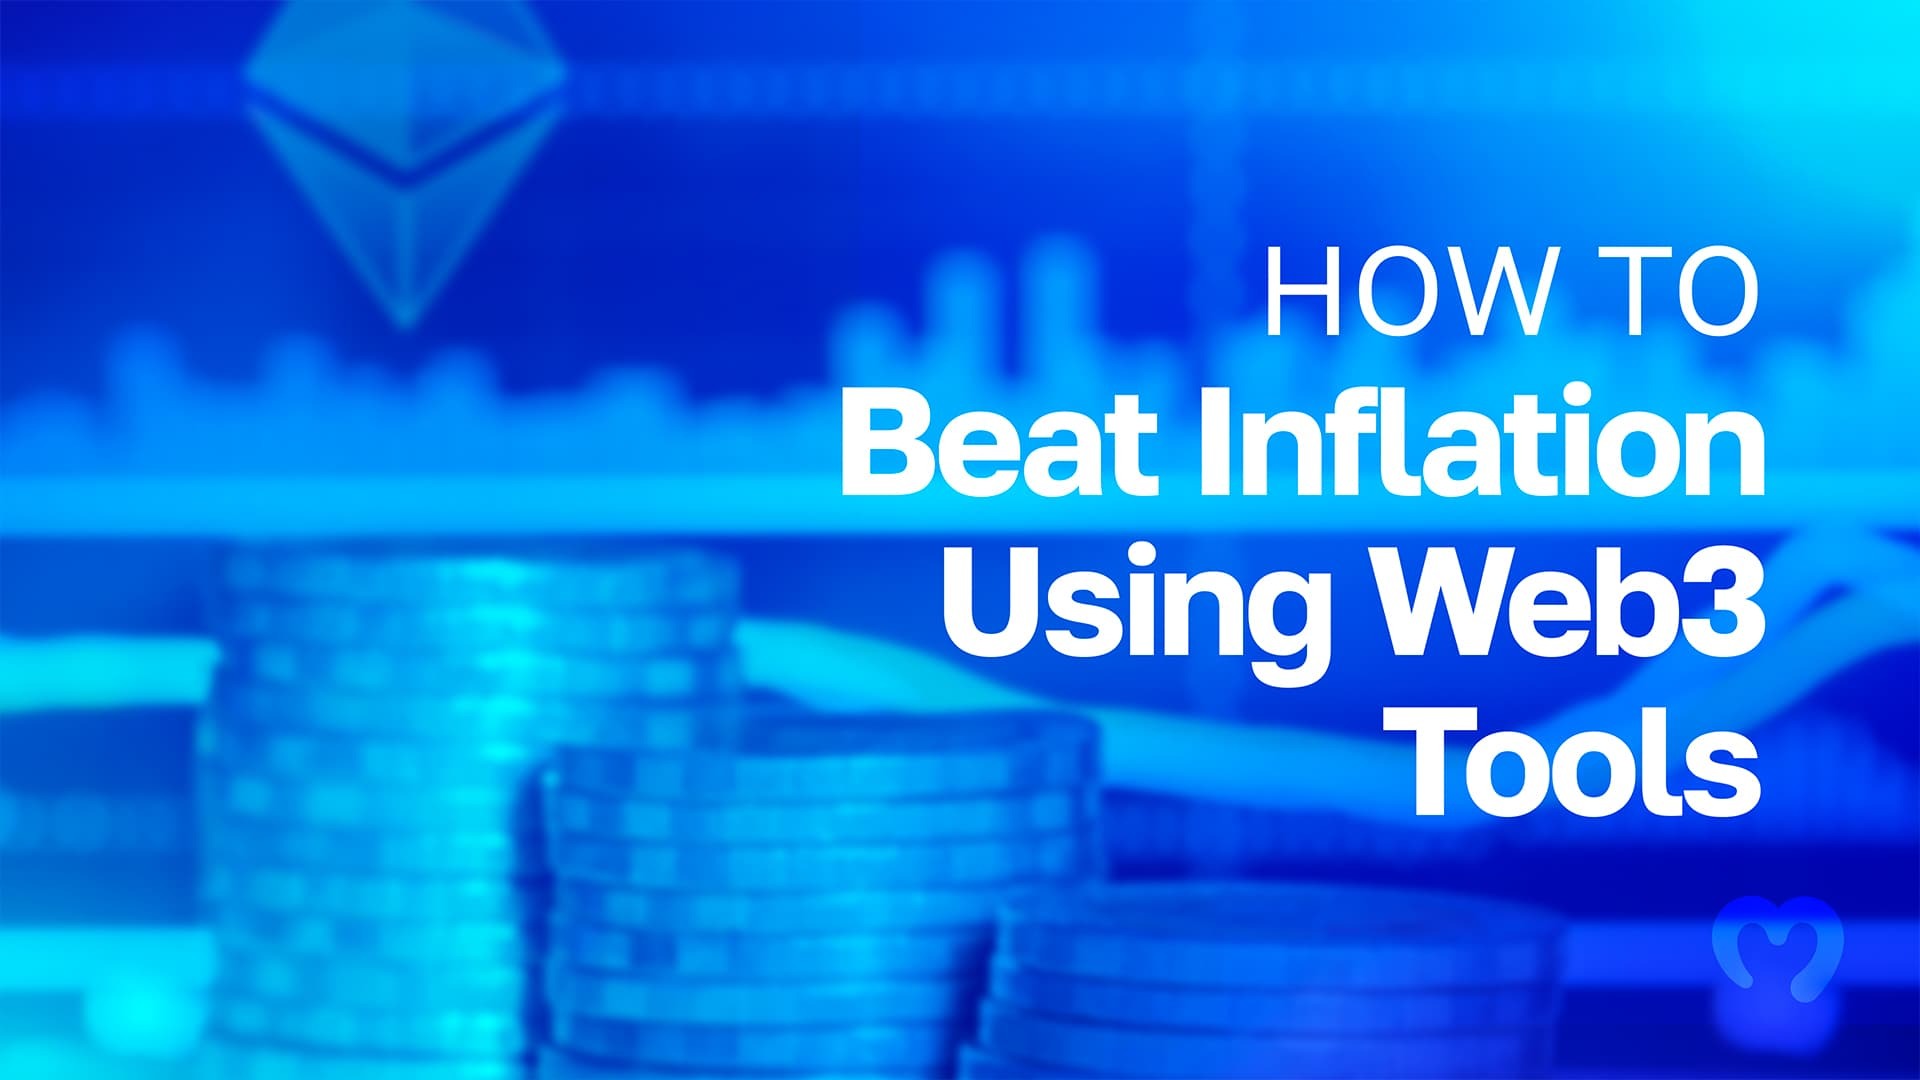 22_08_how-to-Beat-Inflation-Using-Web3-Tools